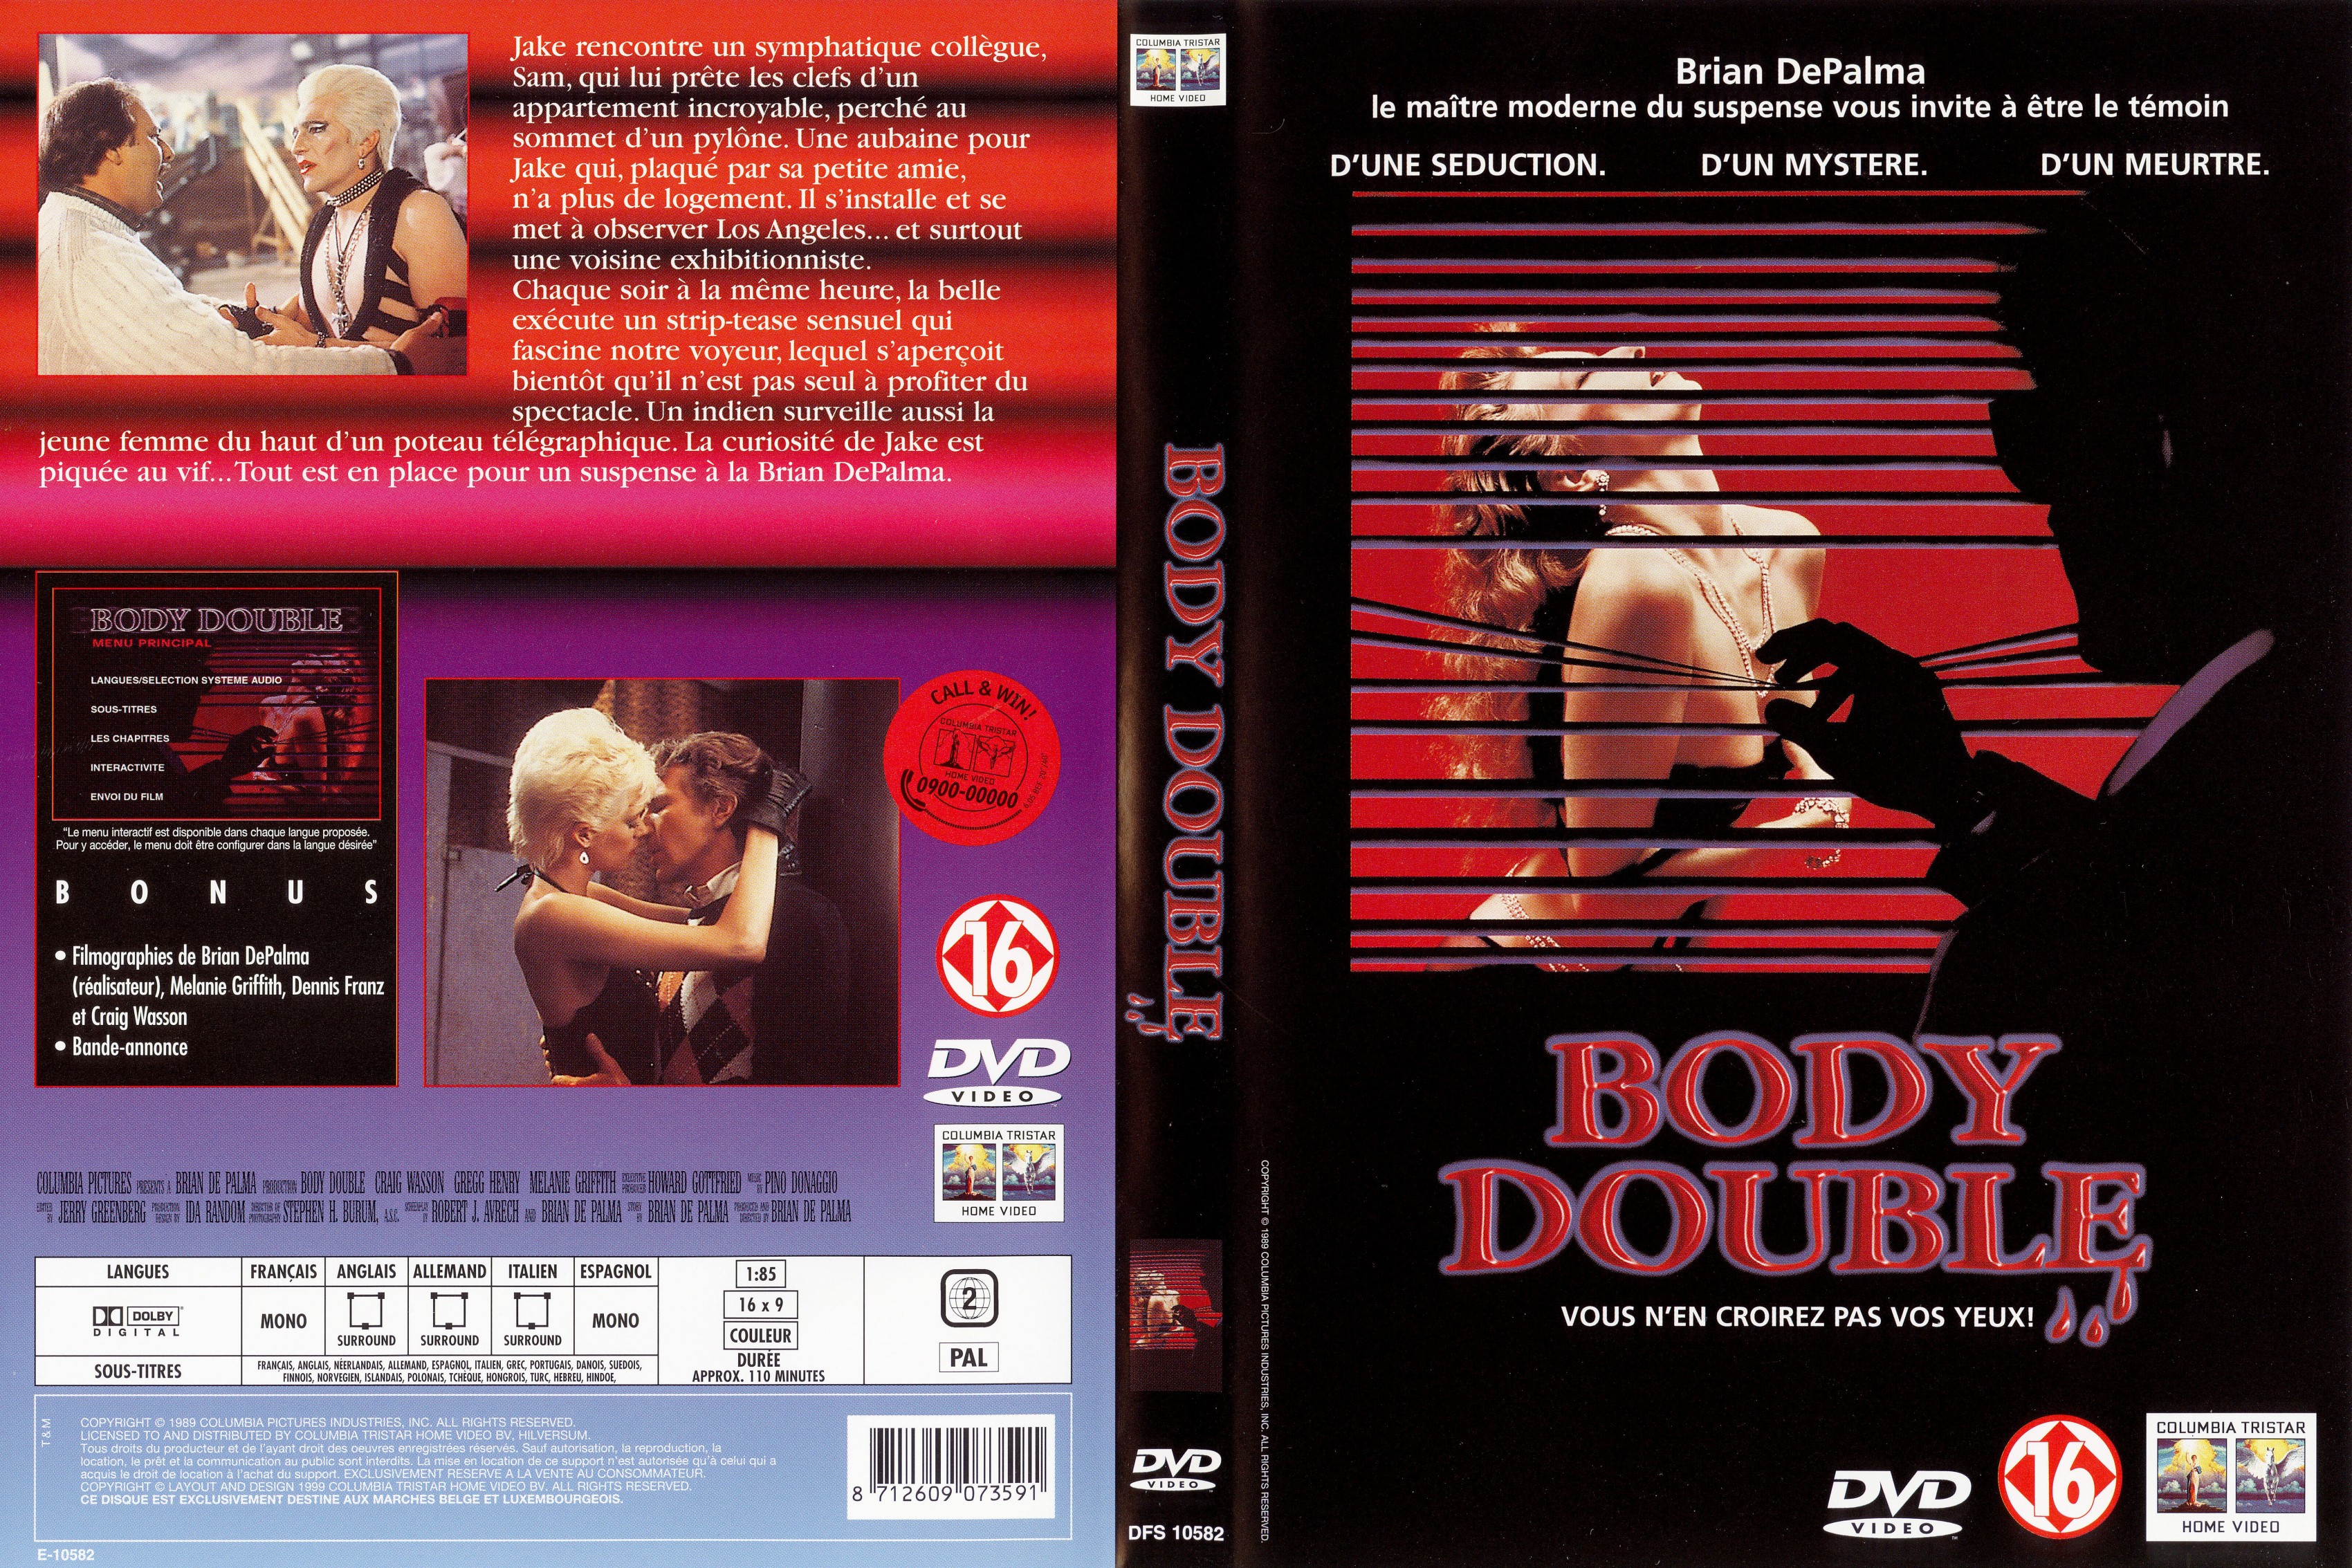 Jaquette DVD Body double